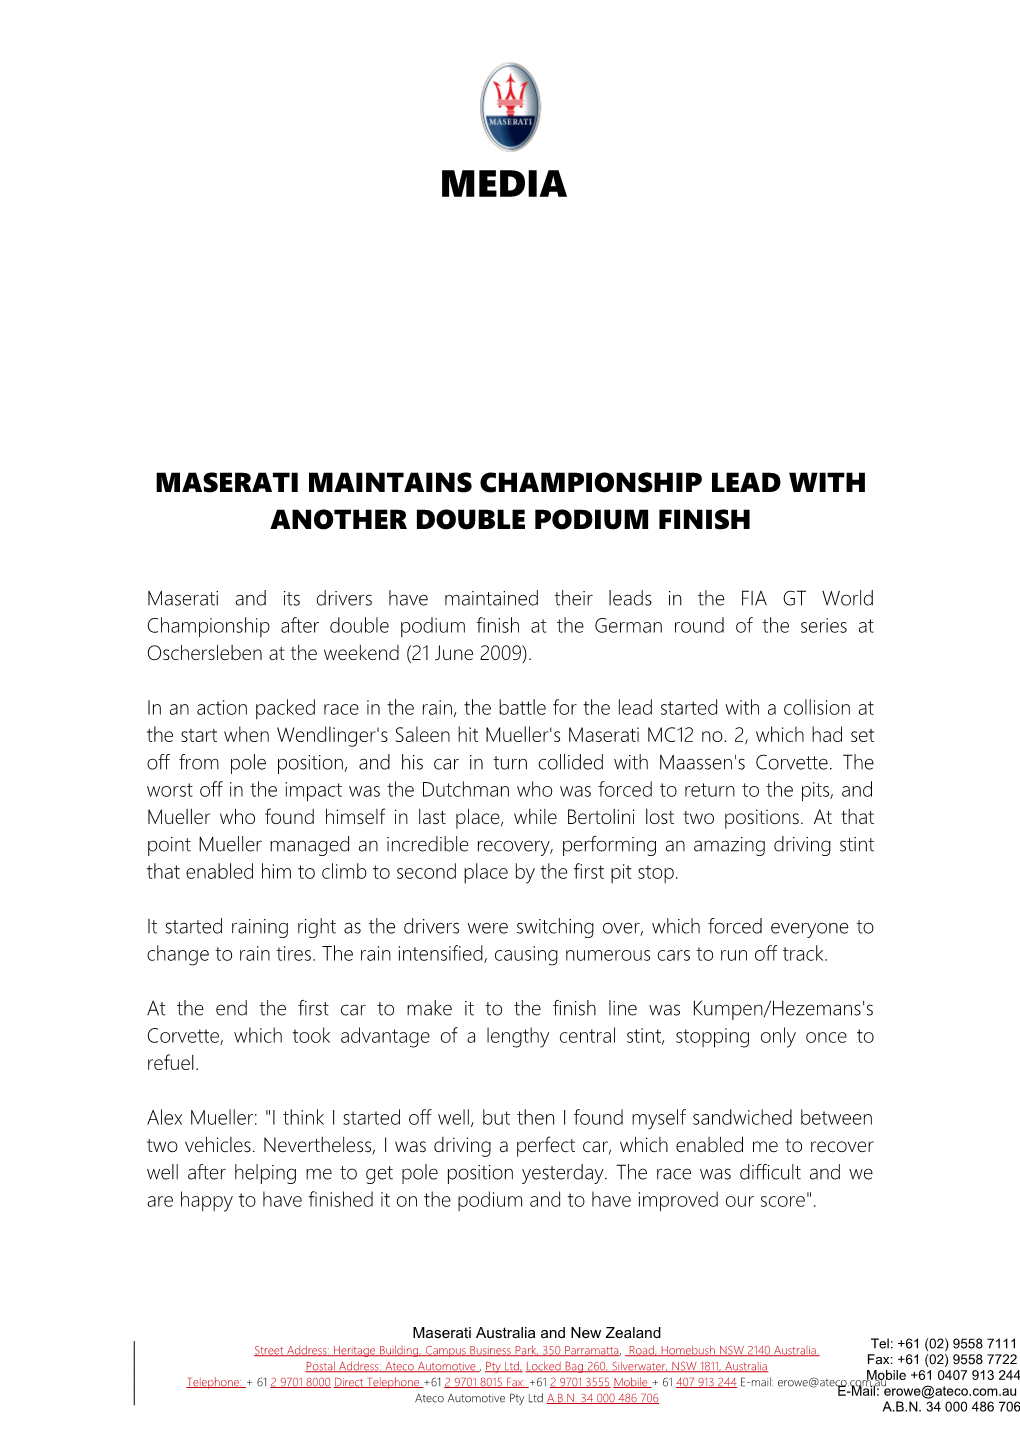 Maserati Maintains Championship Lead with Another Double Podium Finish